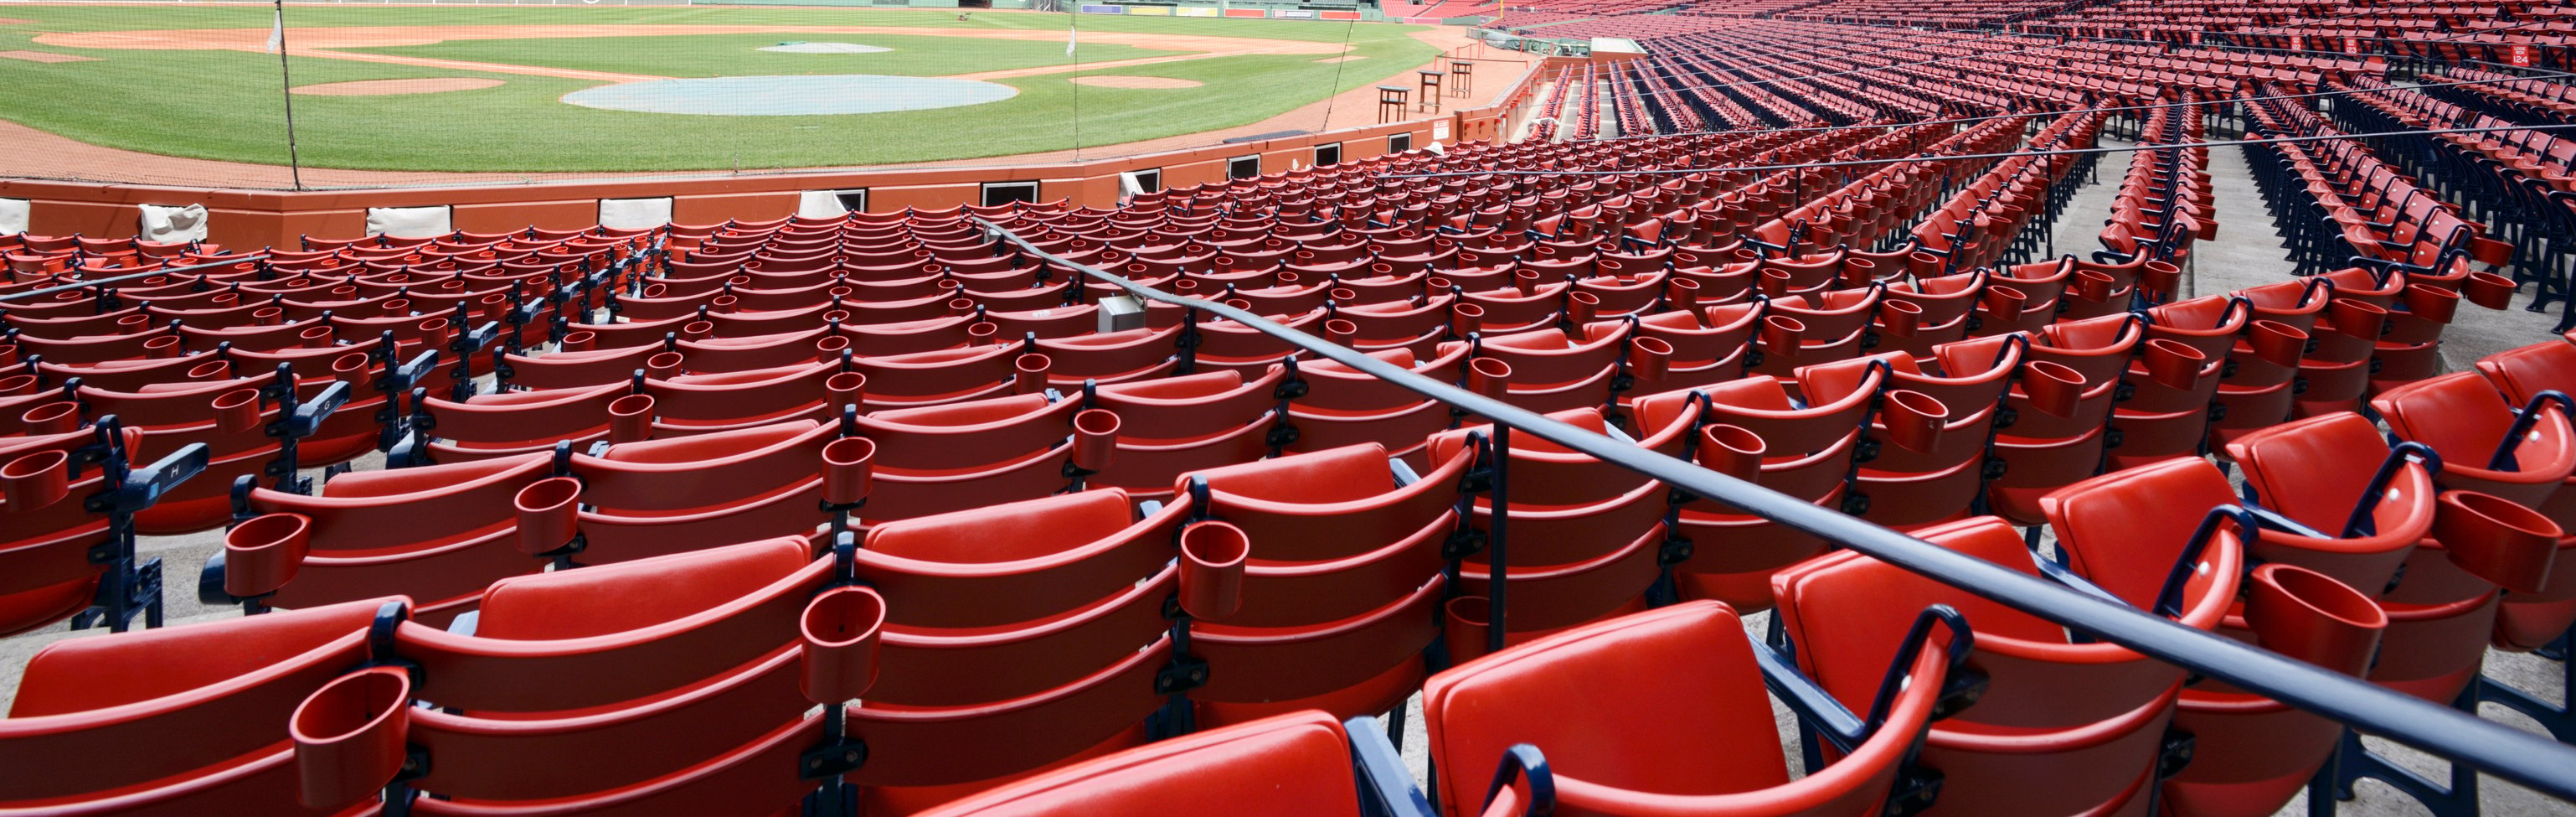 Baseball stadium with rows of red seats